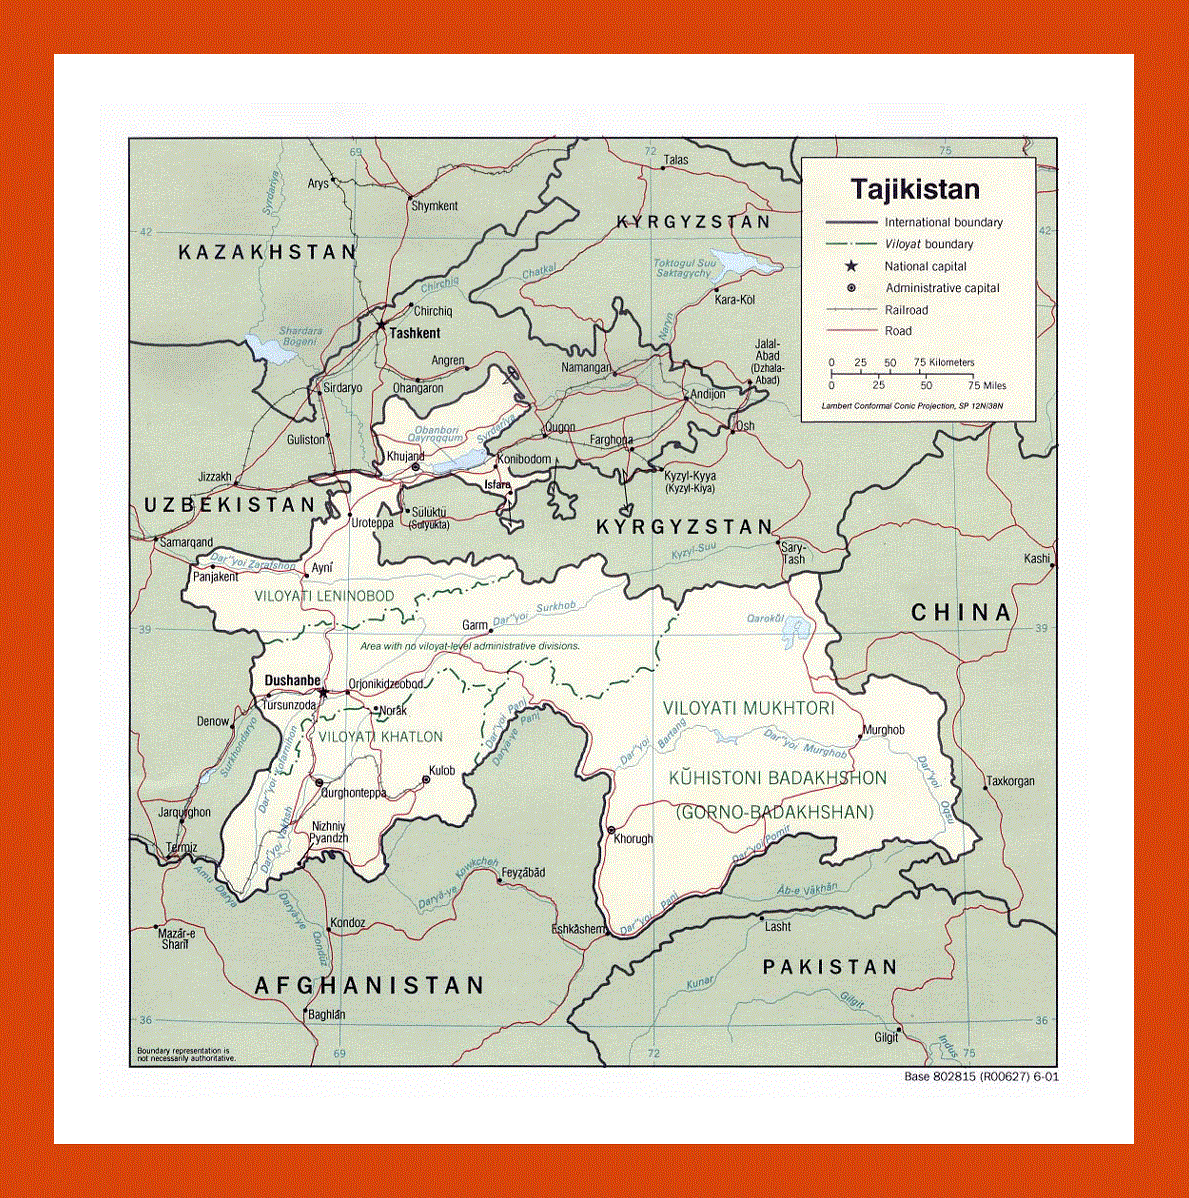 Political and administrative map of Tajikistan - 2001